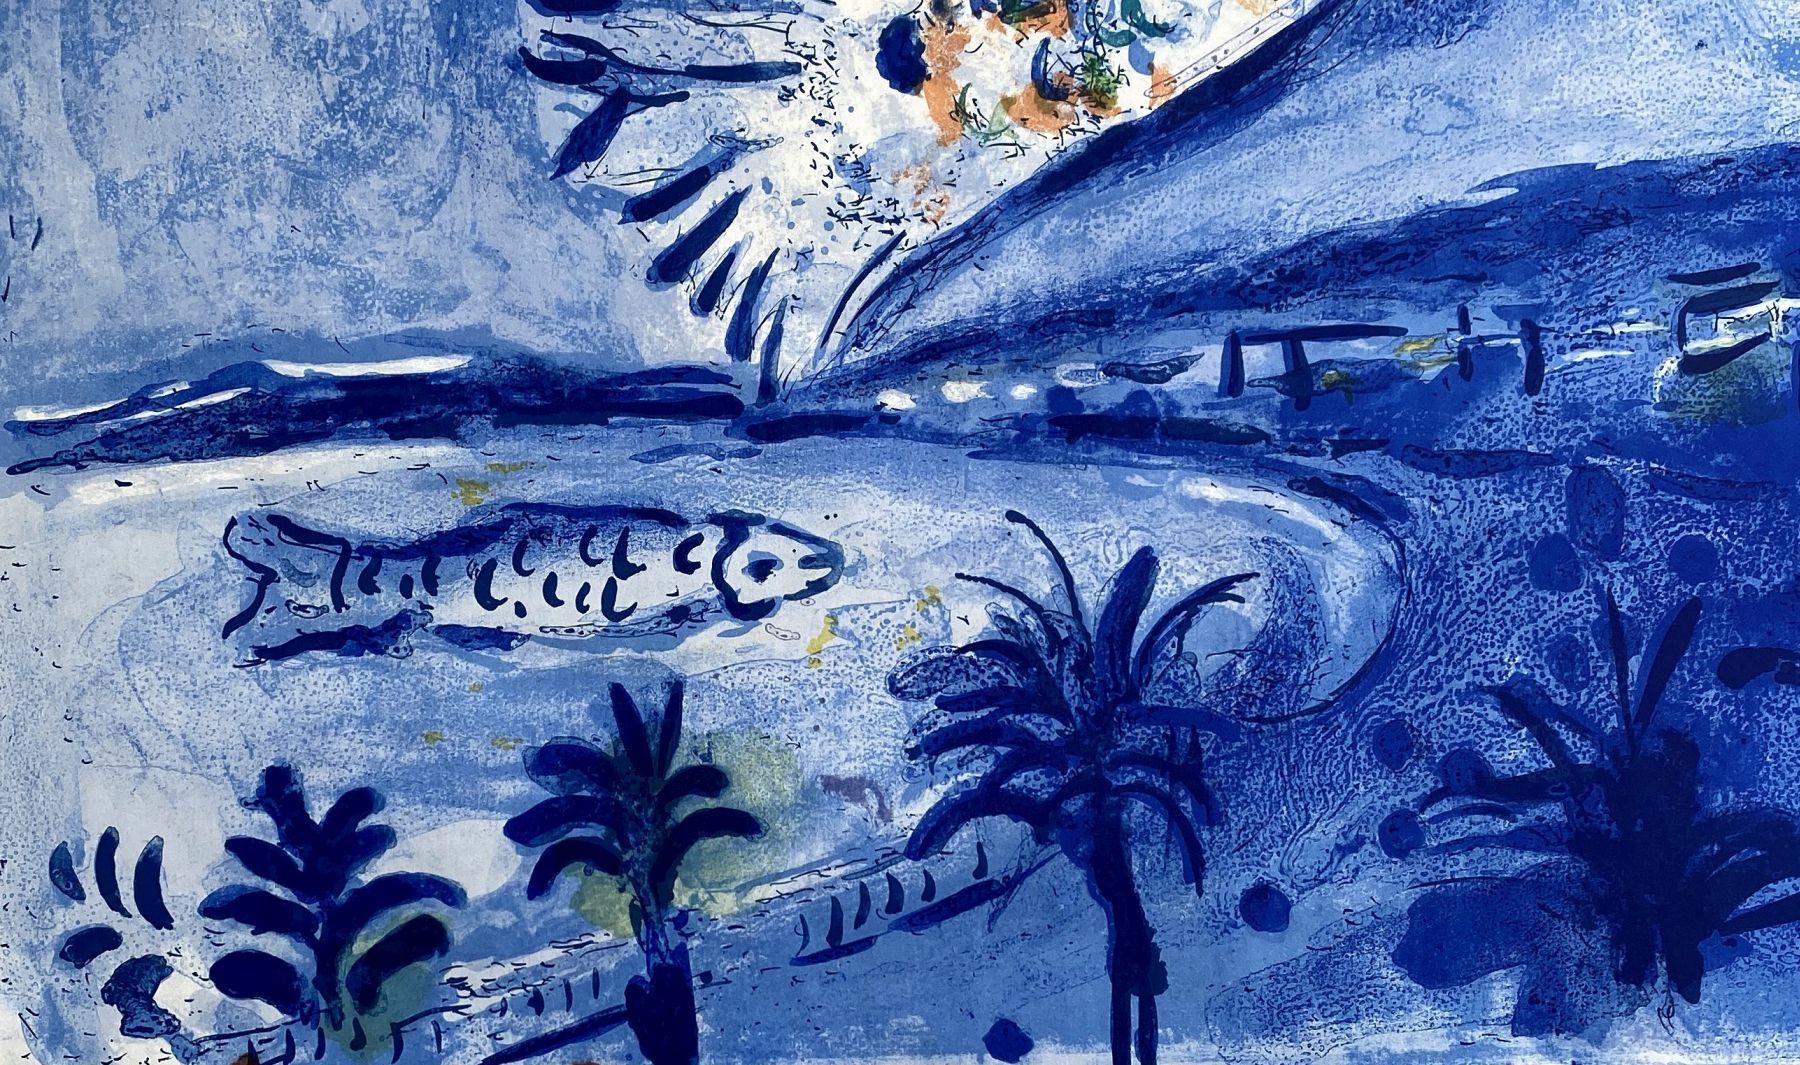 Nice, Bay of Angels - Original Lithograph Poster, Hand Signed - Mourlot #350 - Modern Print by Marc Chagall